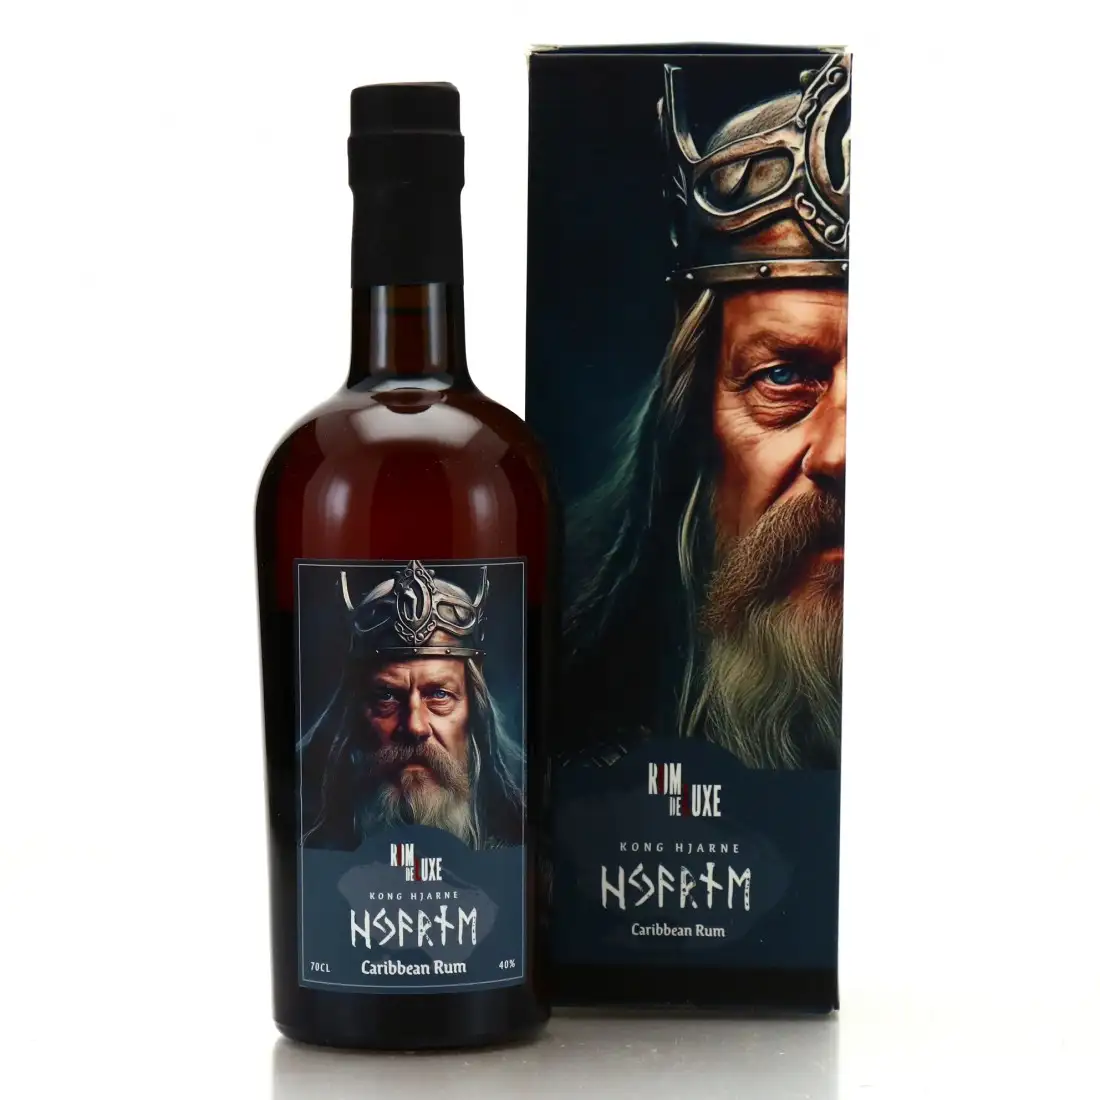 Image of the front of the bottle of the rum Kong Hjarne - Caribbean Rum